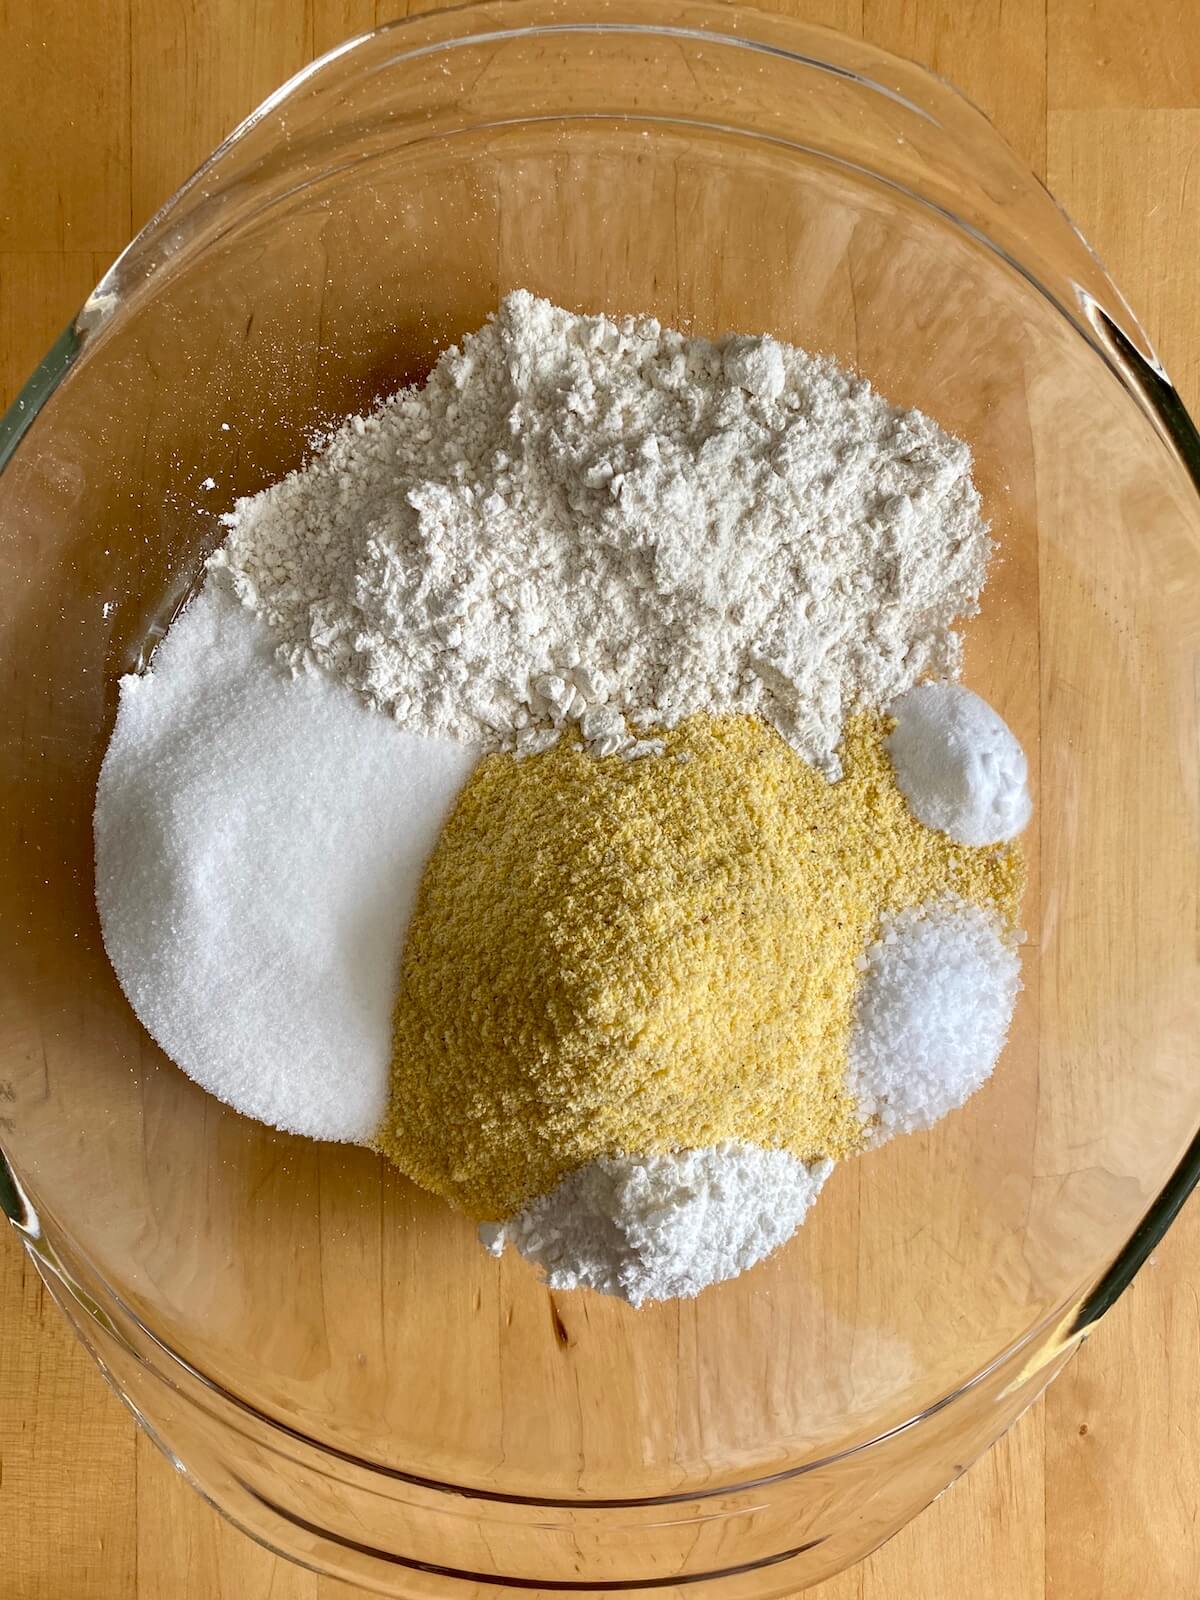 The dry ingredients used to make cornbread in a cast iron skillet in a clear glass mixing bowl. The ingredients are not yet mixed so they're easy to distinguish from one another.